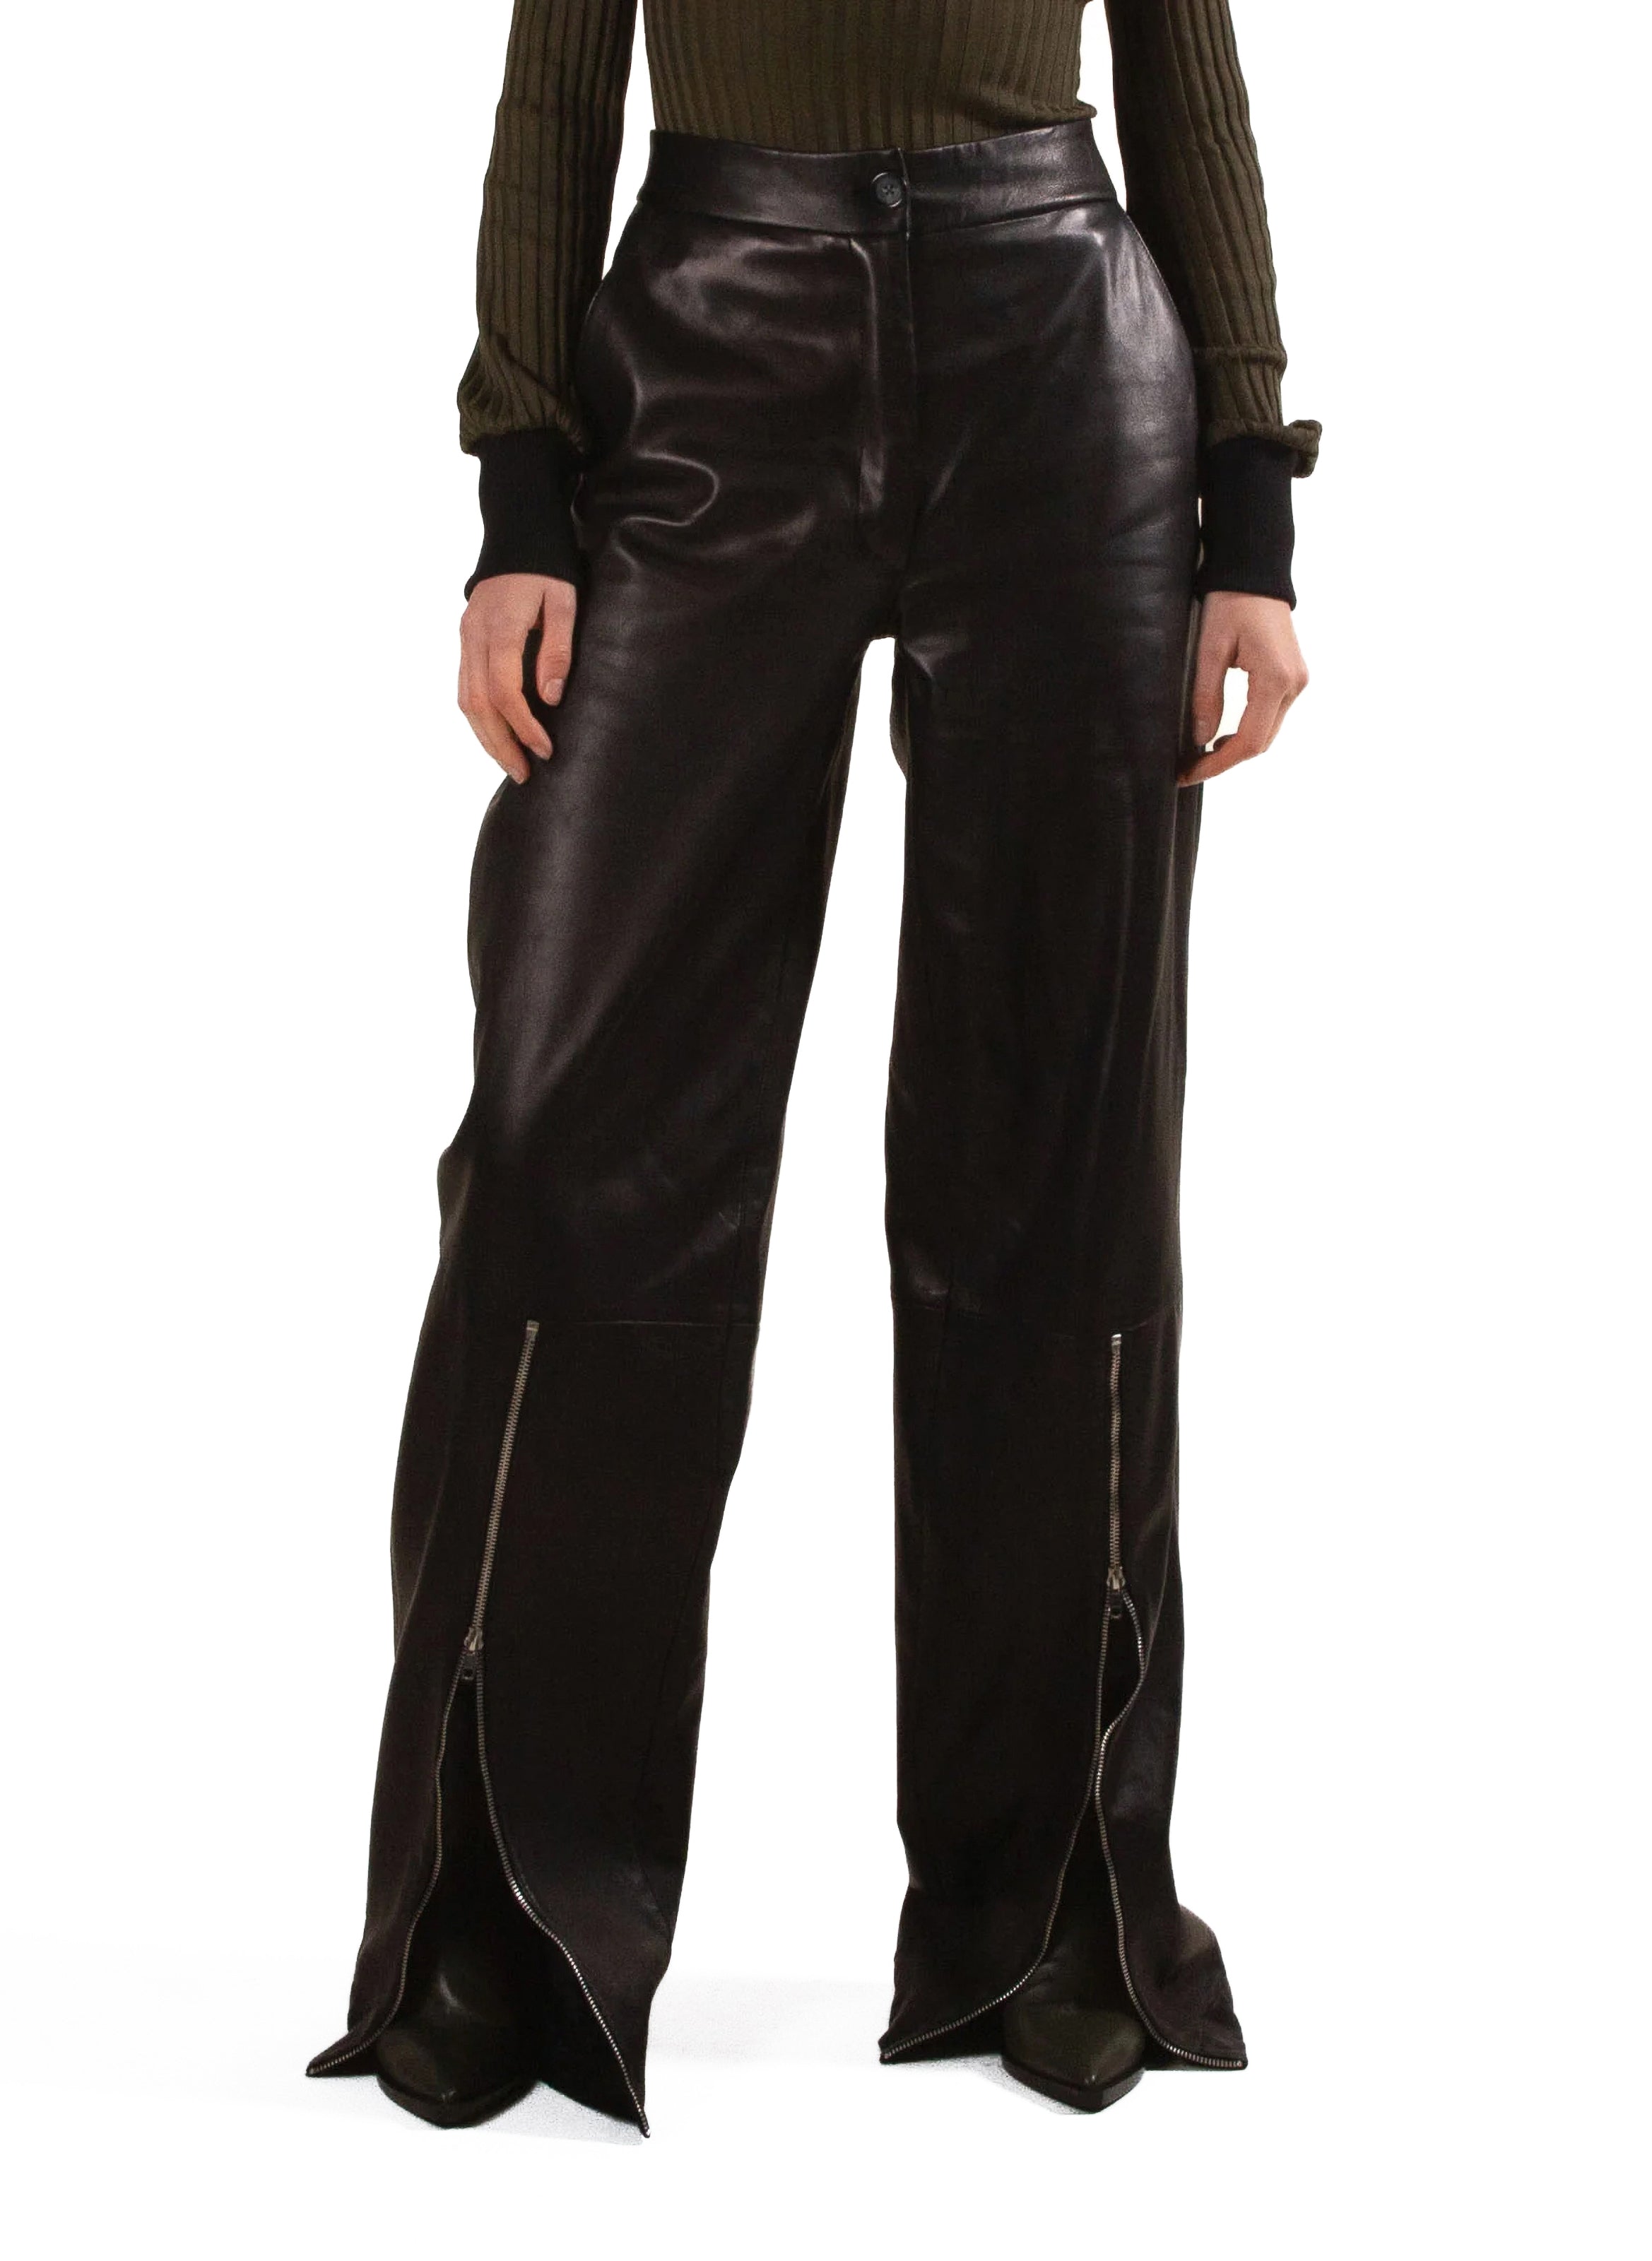 Dilyenne Pant - Mid Waist Straight Leg Faux Leather Pant in Beige | Showpo  USA